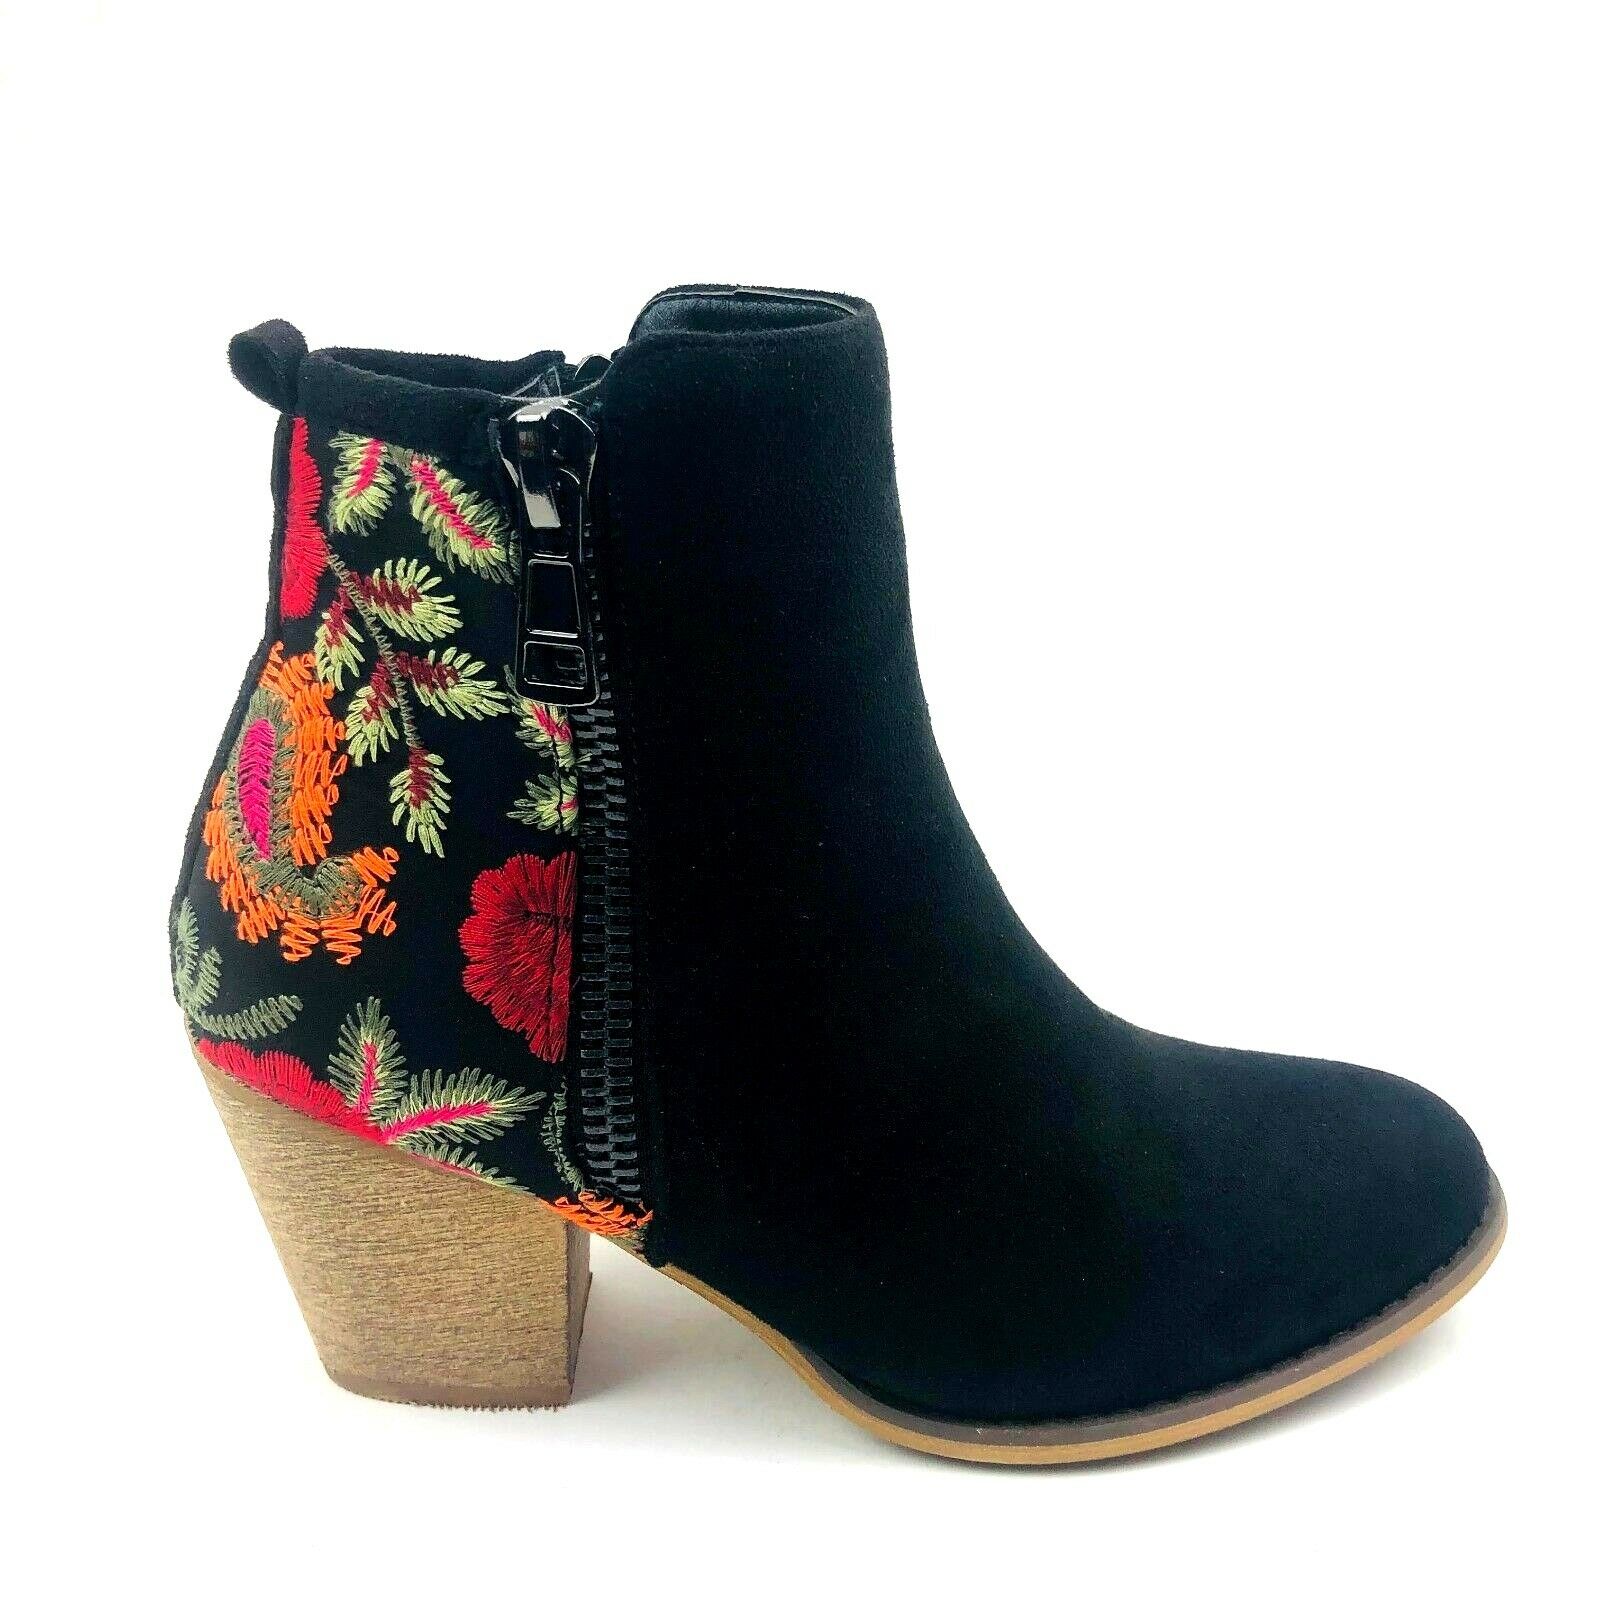 black boots with floral embroidery